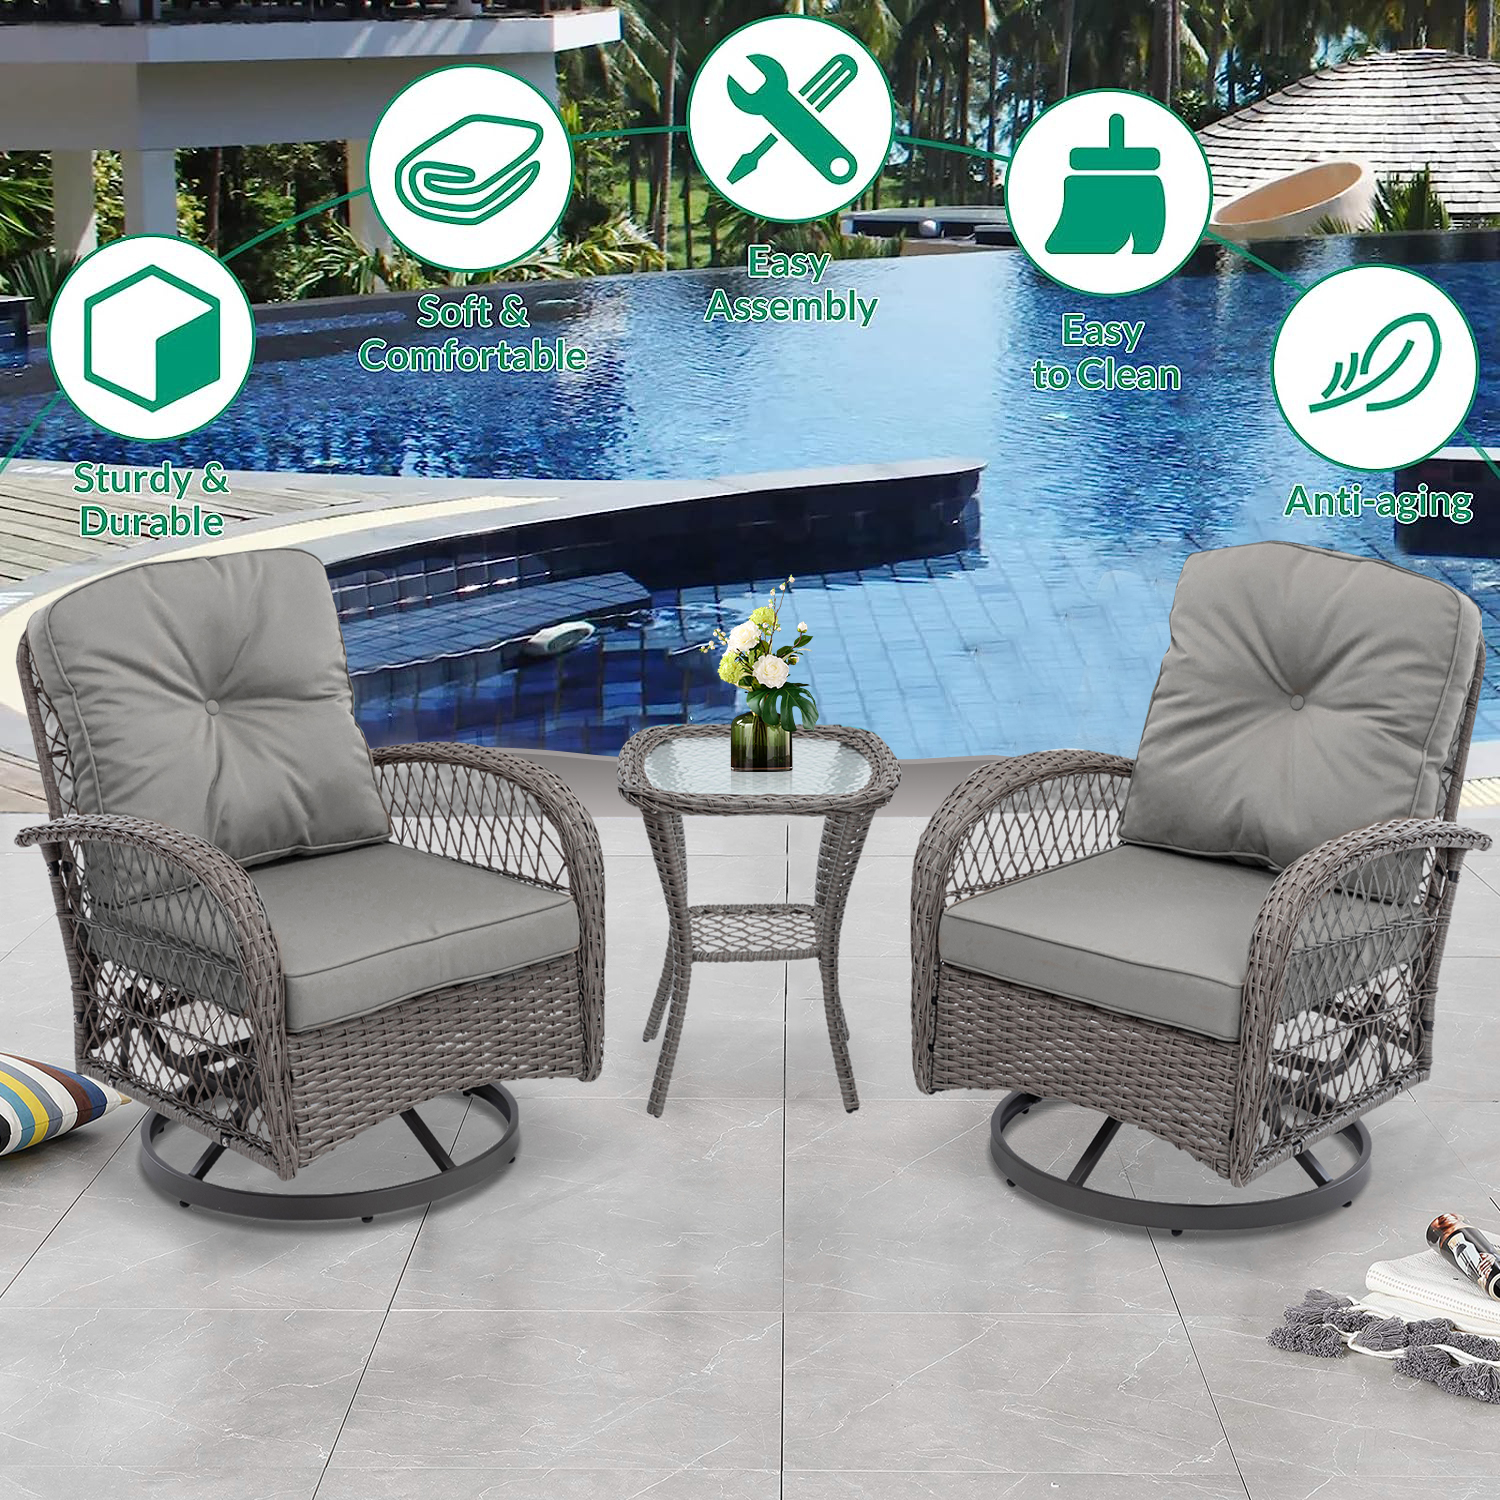 3-Piece Patio Bistro Furniture Set, 360° Patio Rattan Wicker Swivel Rocking Chair Set with Thickened Cushions and Glass Coffee Table, 275 LBS, Grey - image 4 of 10